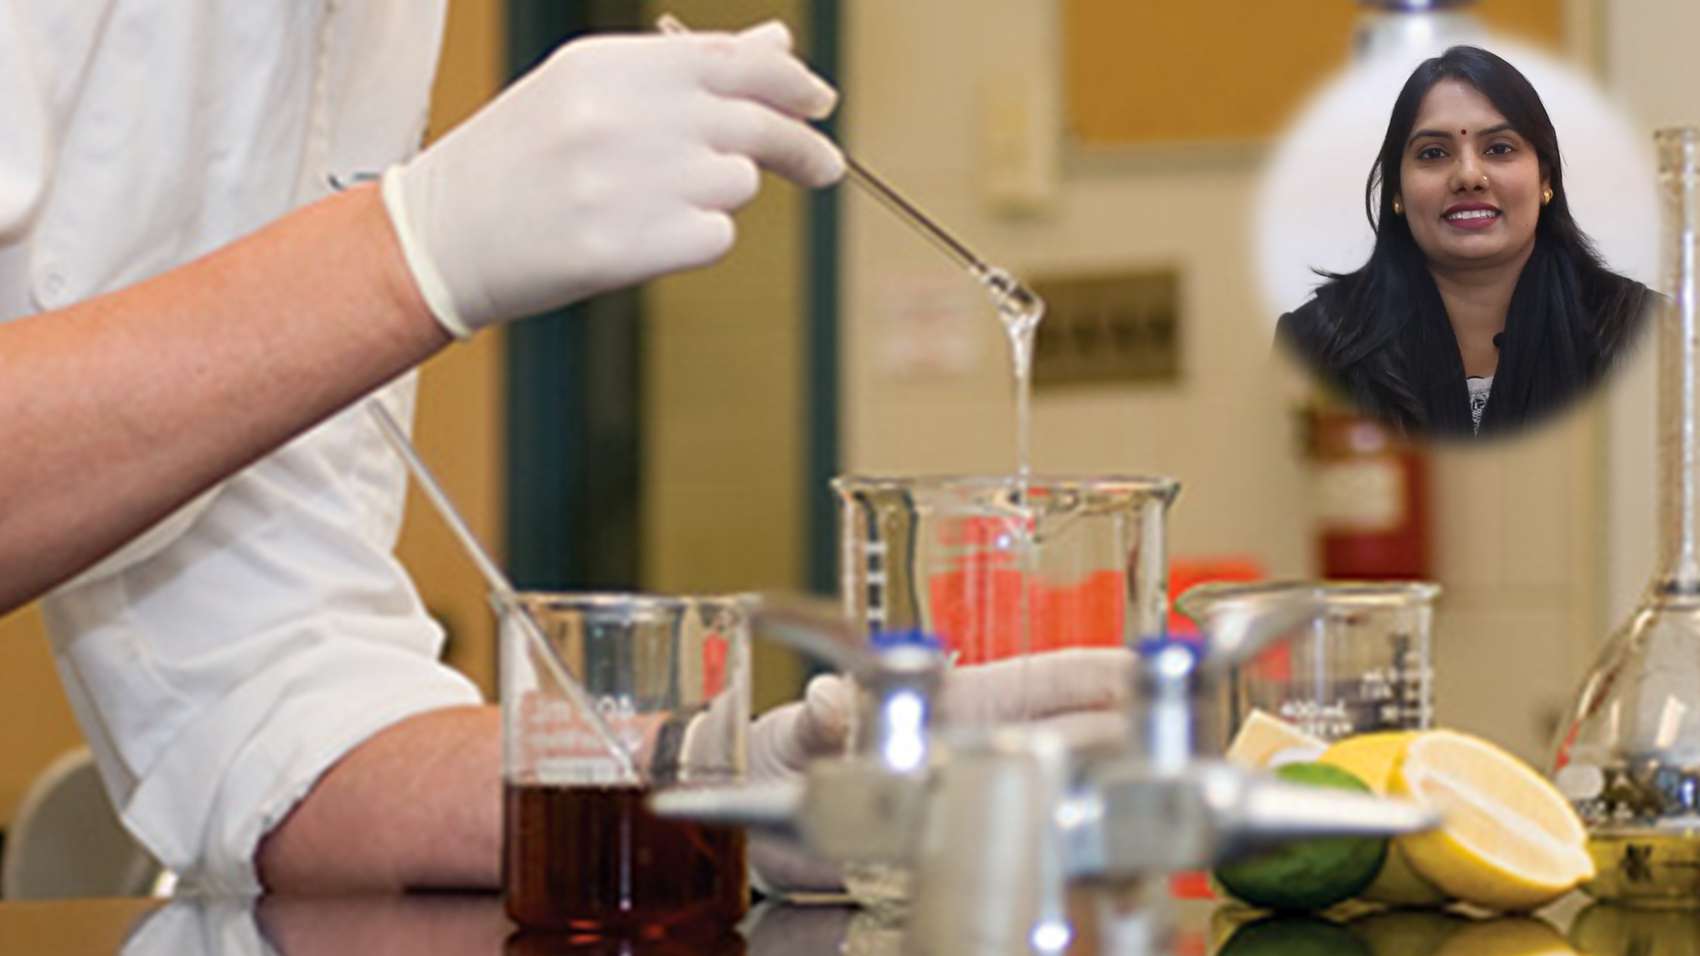 Career in Food Technology